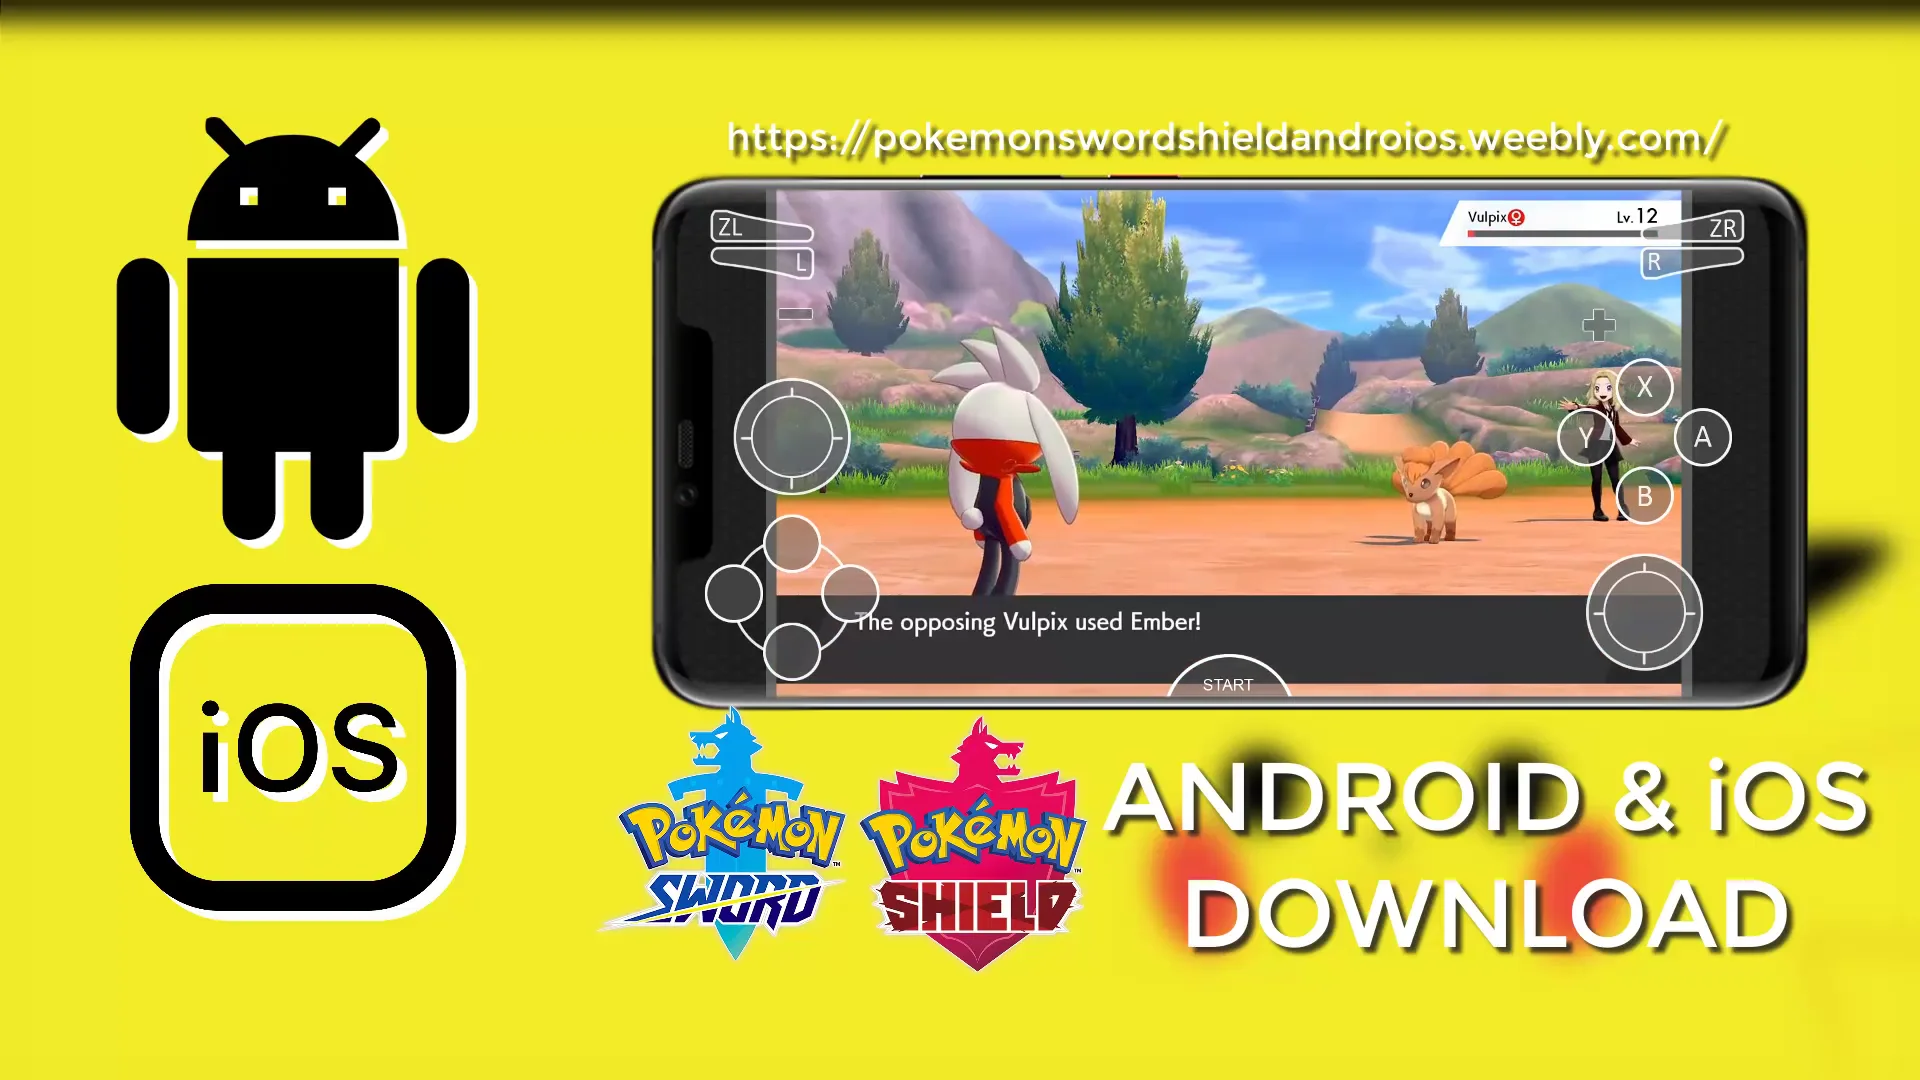 How to Get Pokémon Sword & Shield The Crown Tundra on Android Mobile on  Vimeo